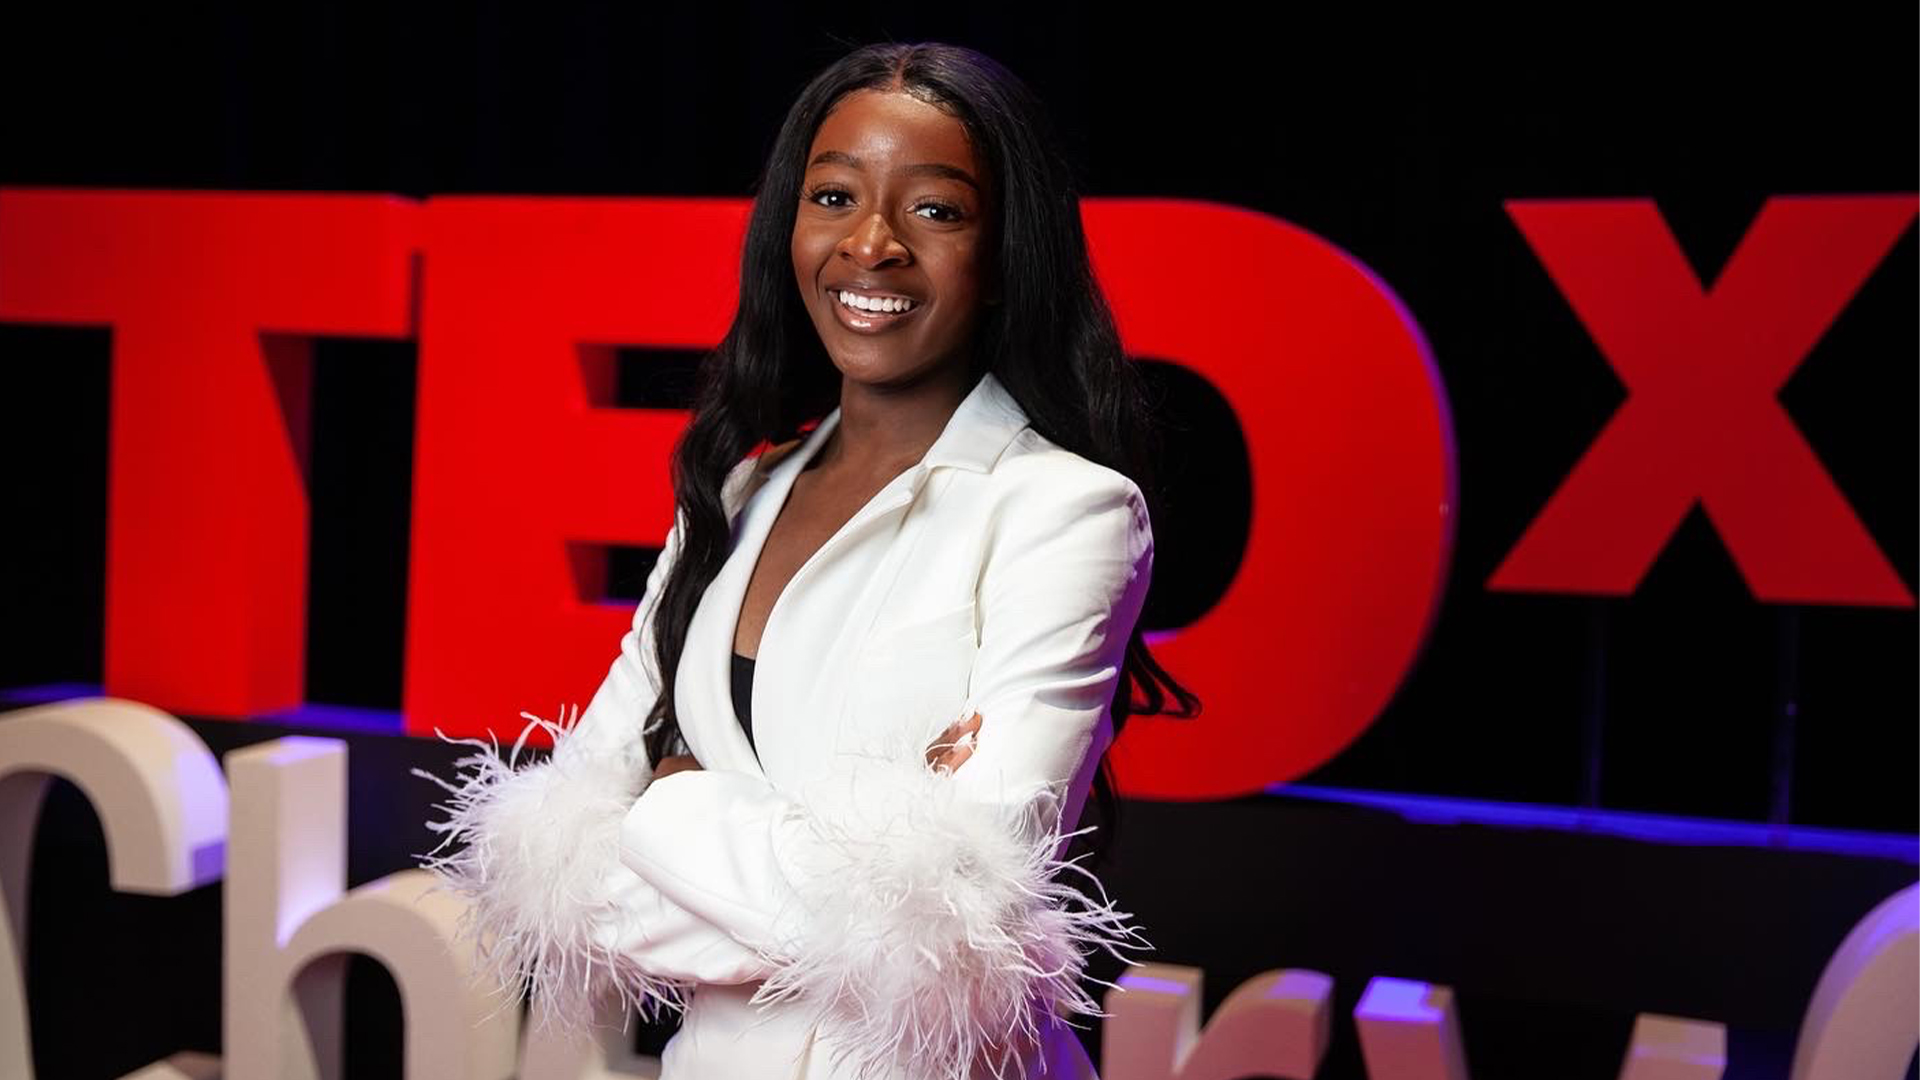 Meet Sarah Adewumi, A Science Communicator At NASA Who Went From Pageant Queen To An Advocate For Black Girls In STEM